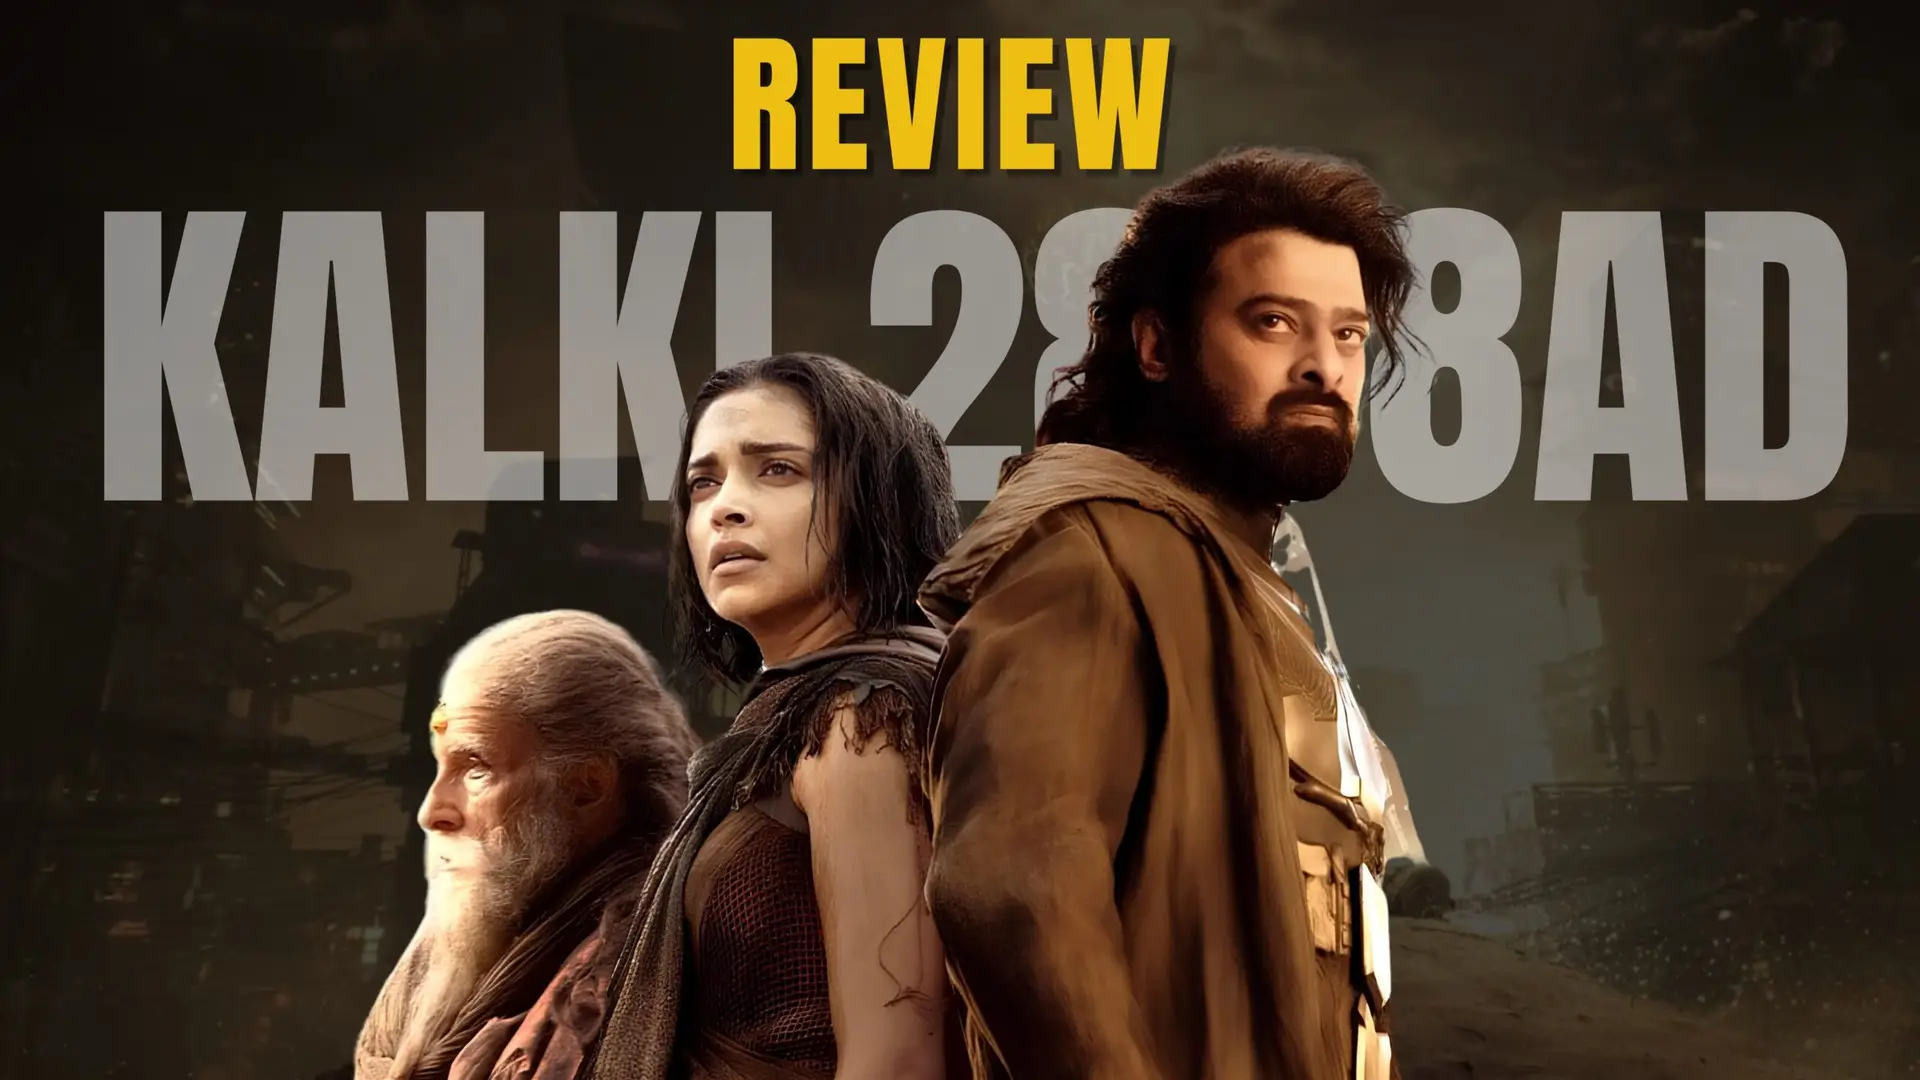 Kalki 2989 AD Review : Expect the Unexpected